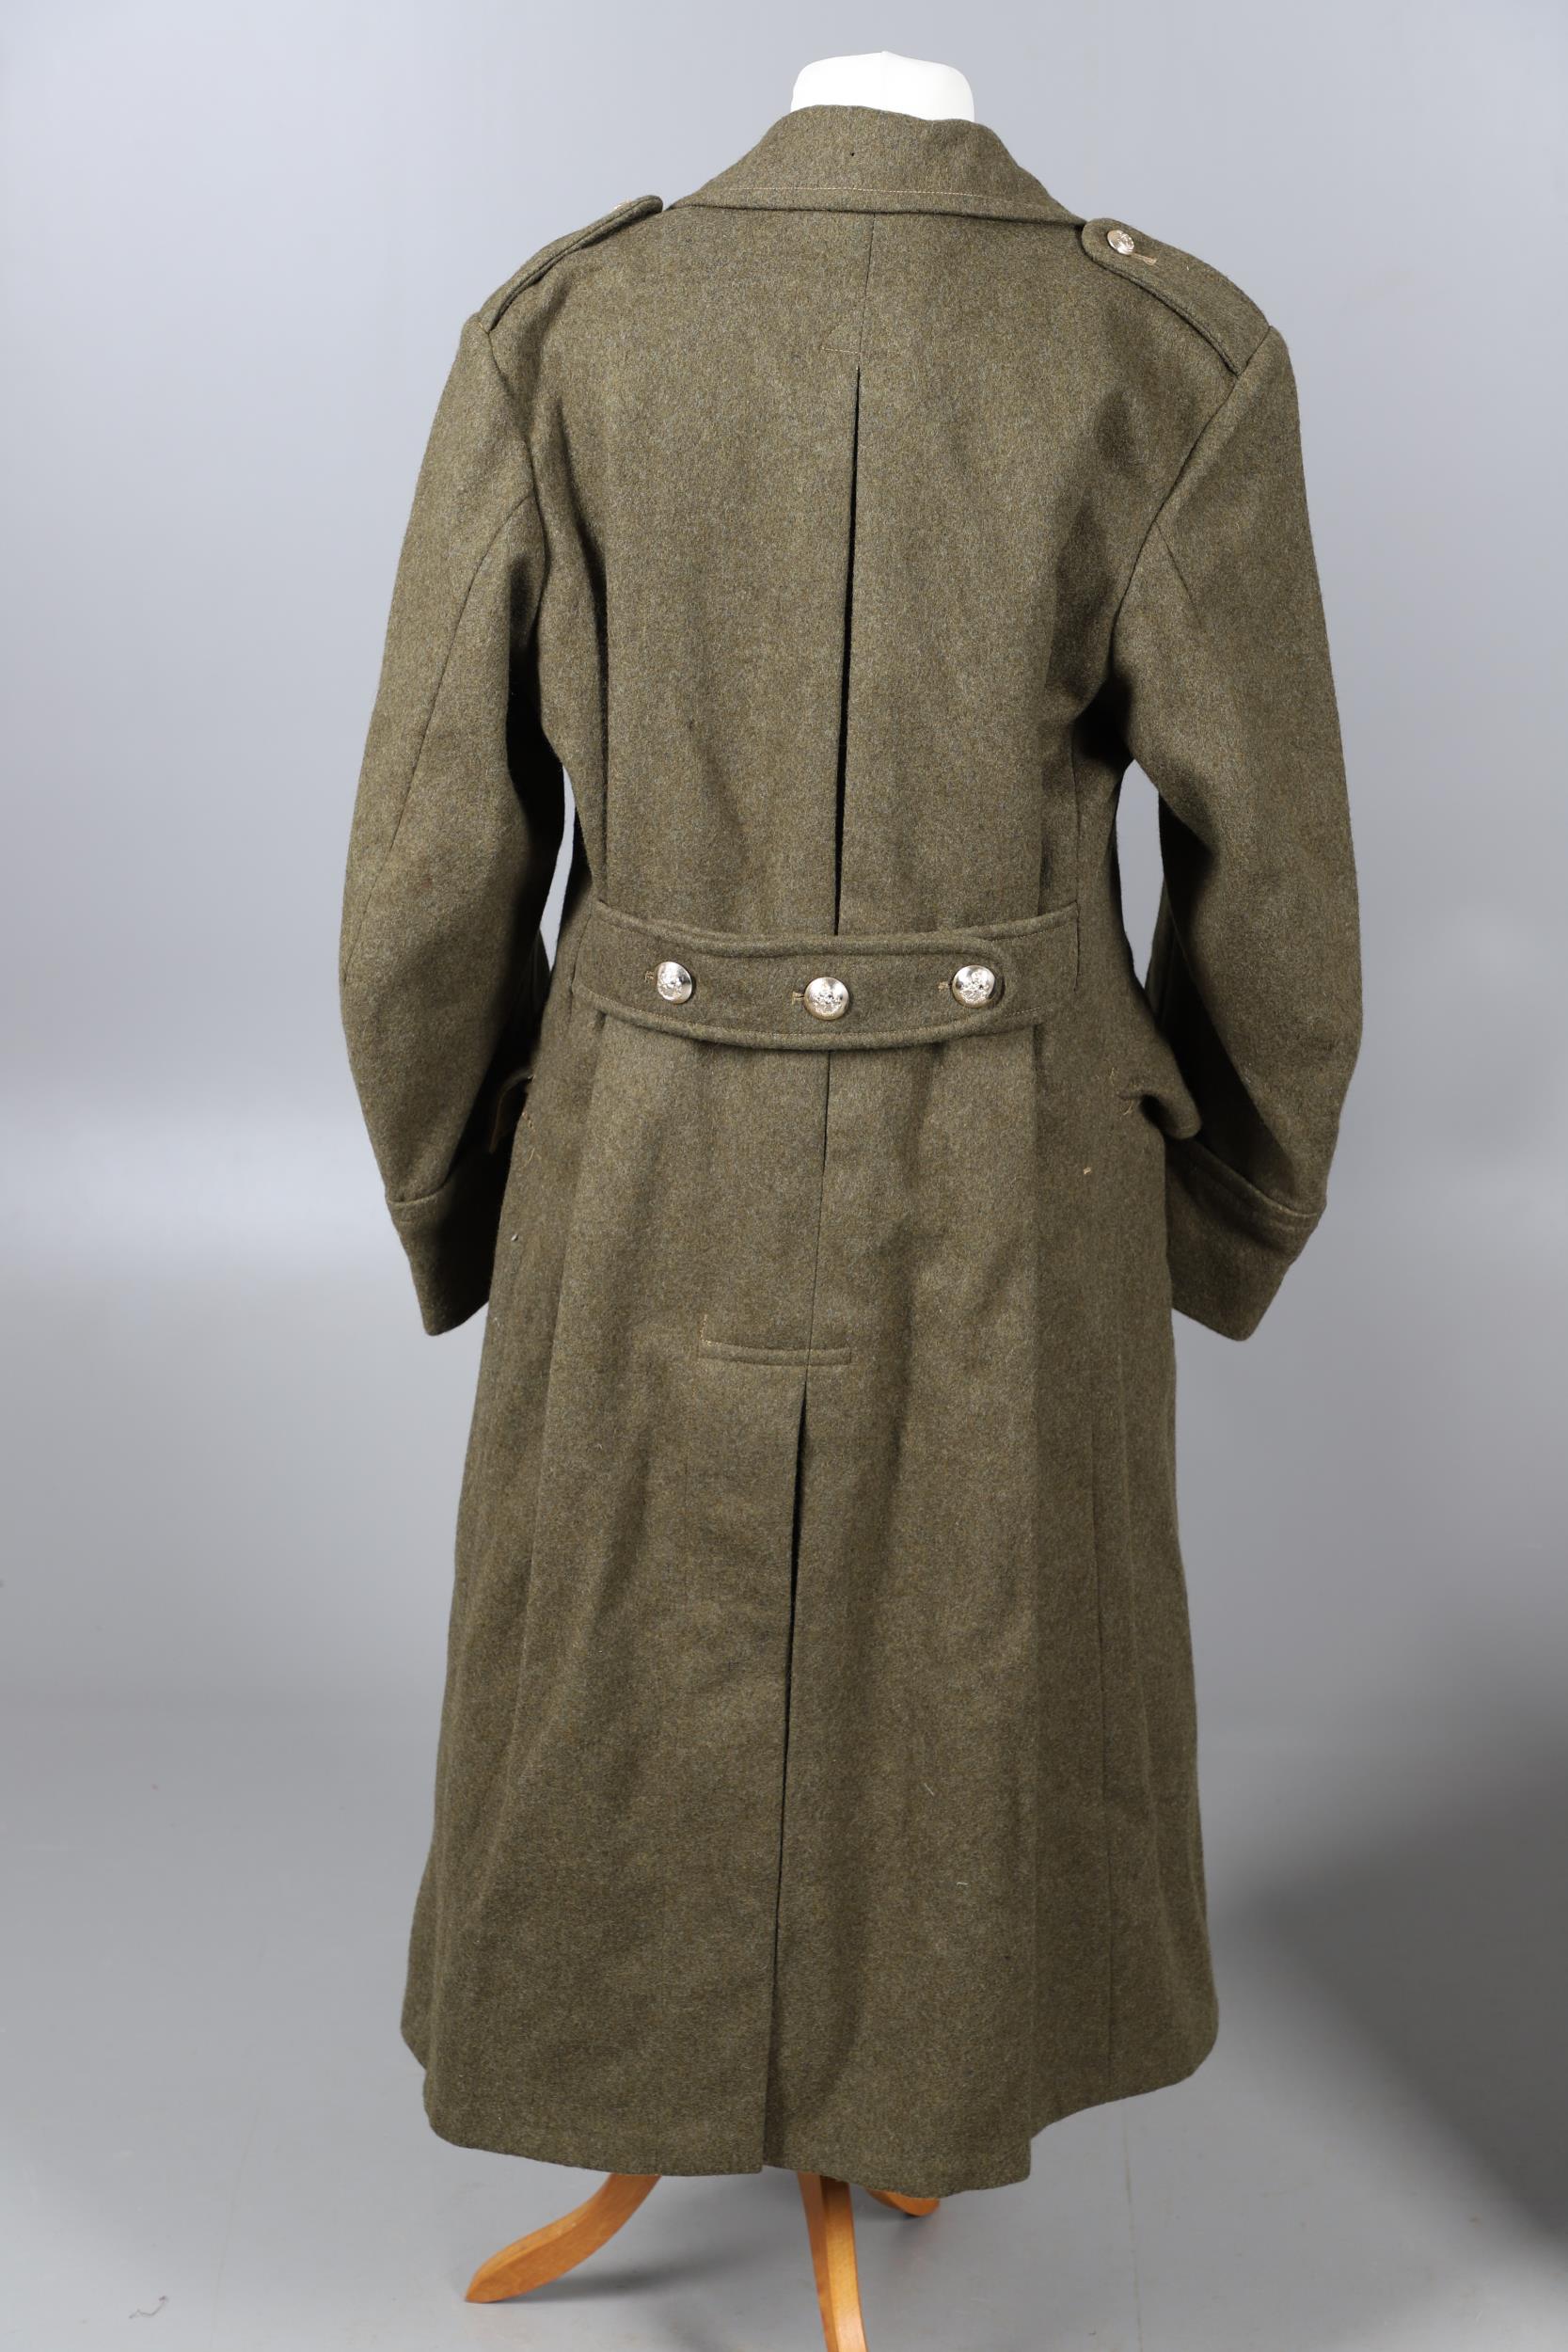 A 1951 PATTERN ARMY GREATCOAT AND A SIMILAR RAF GREATCOAT. - Image 6 of 17